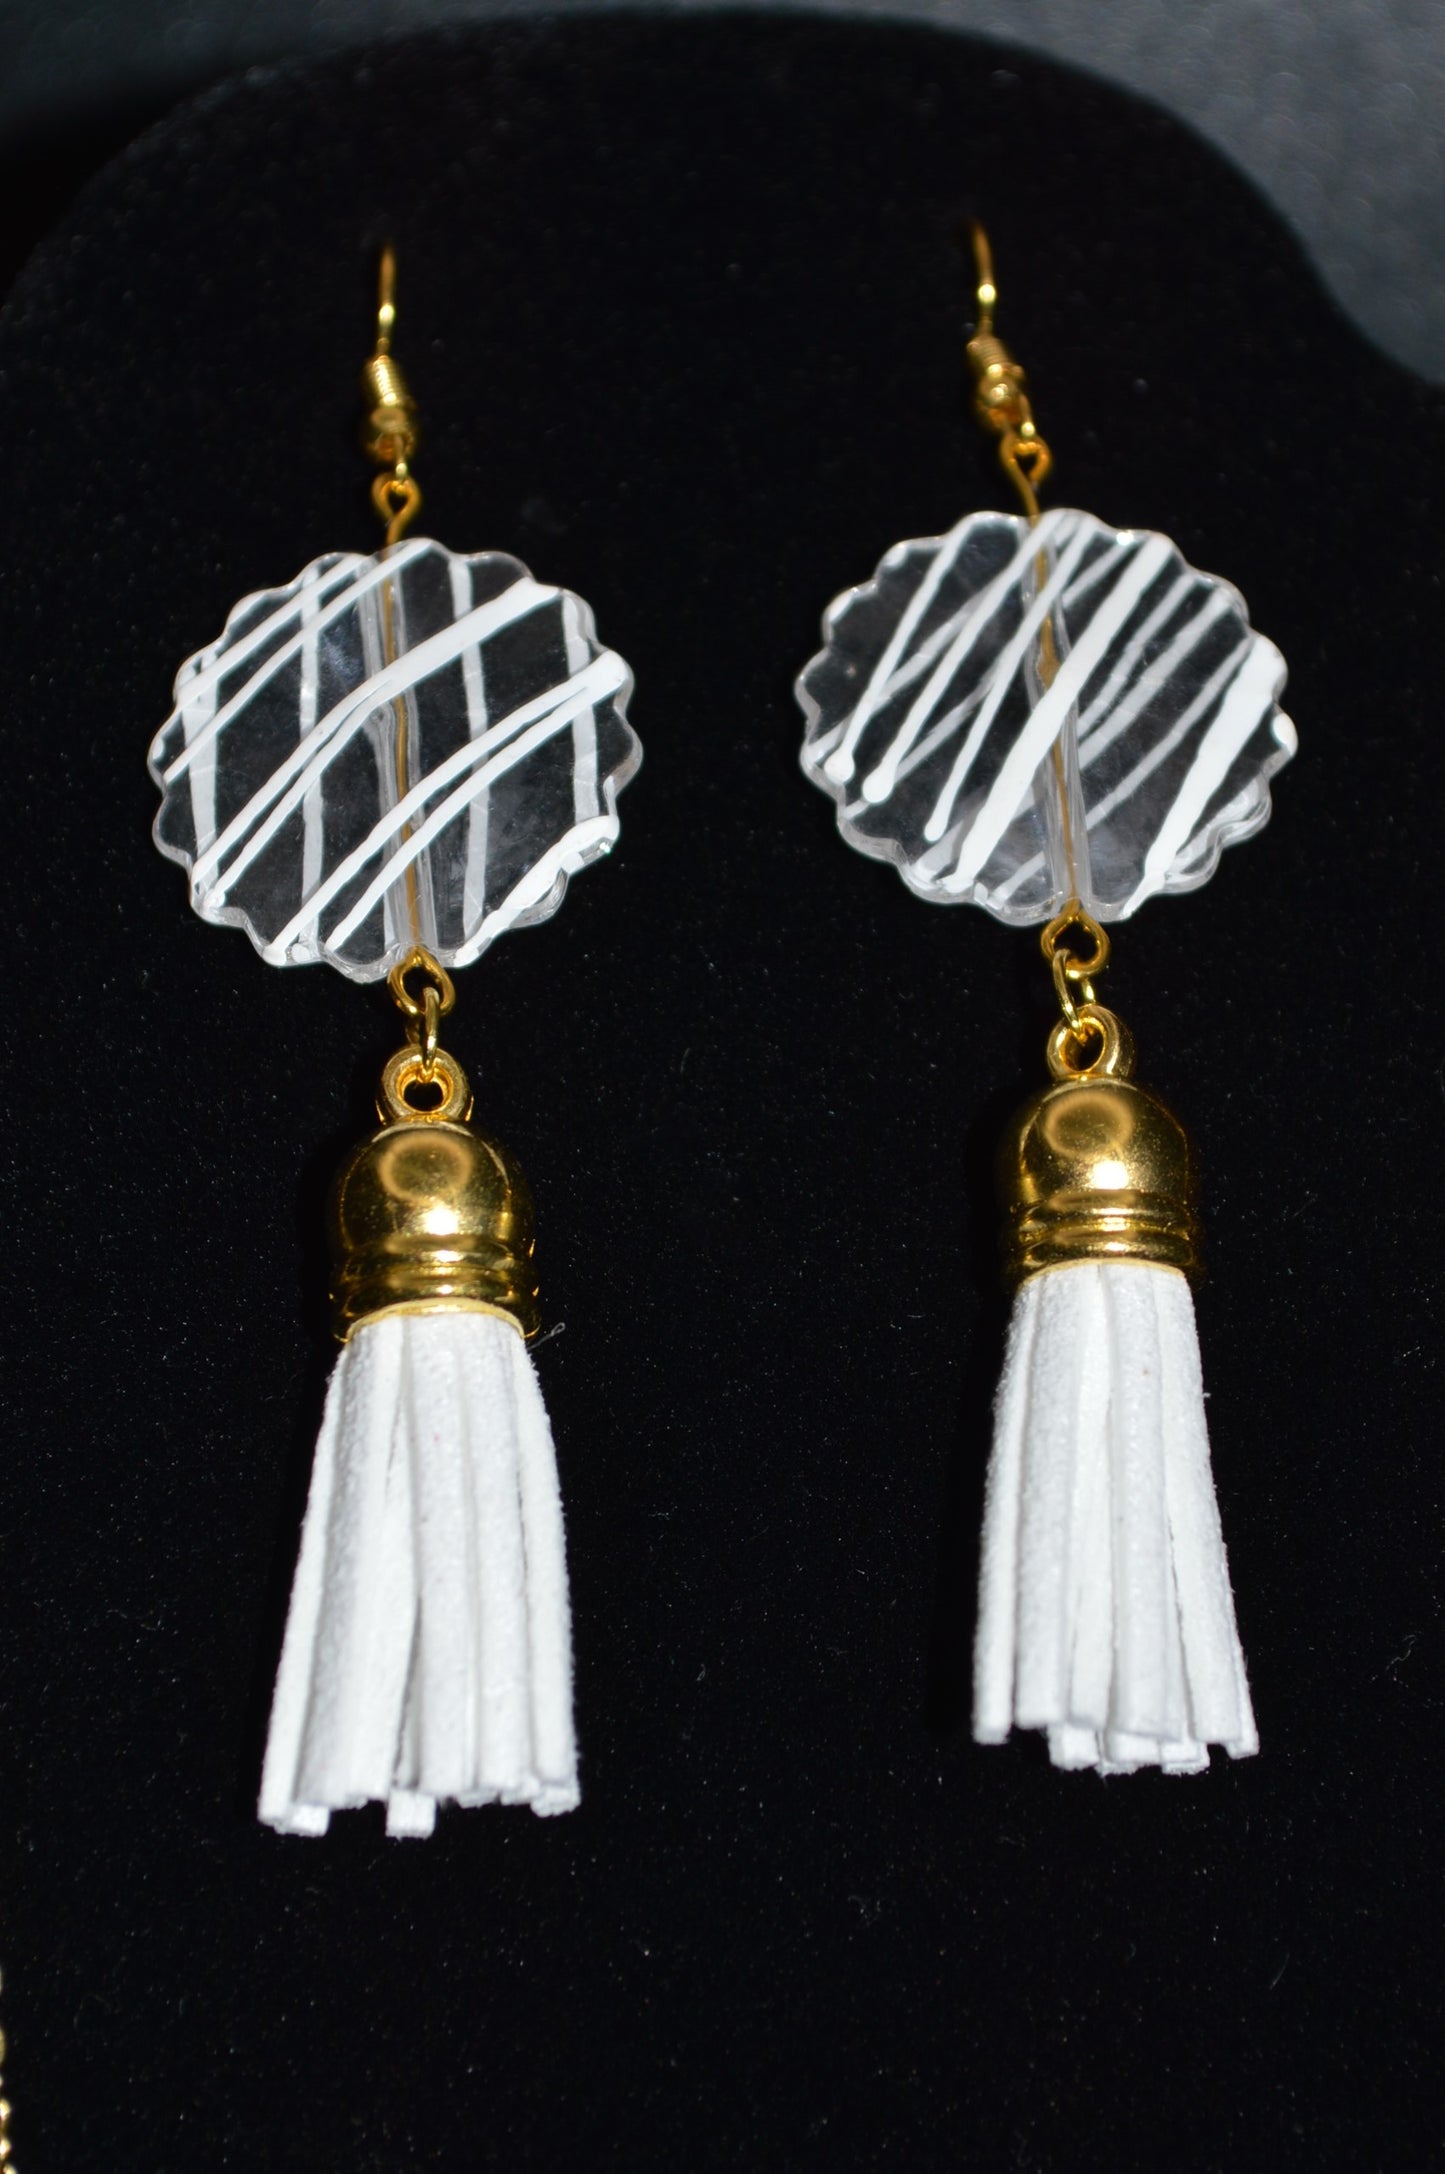 Striped Acrylic Pendant with Tassel Necklace and Earring Set